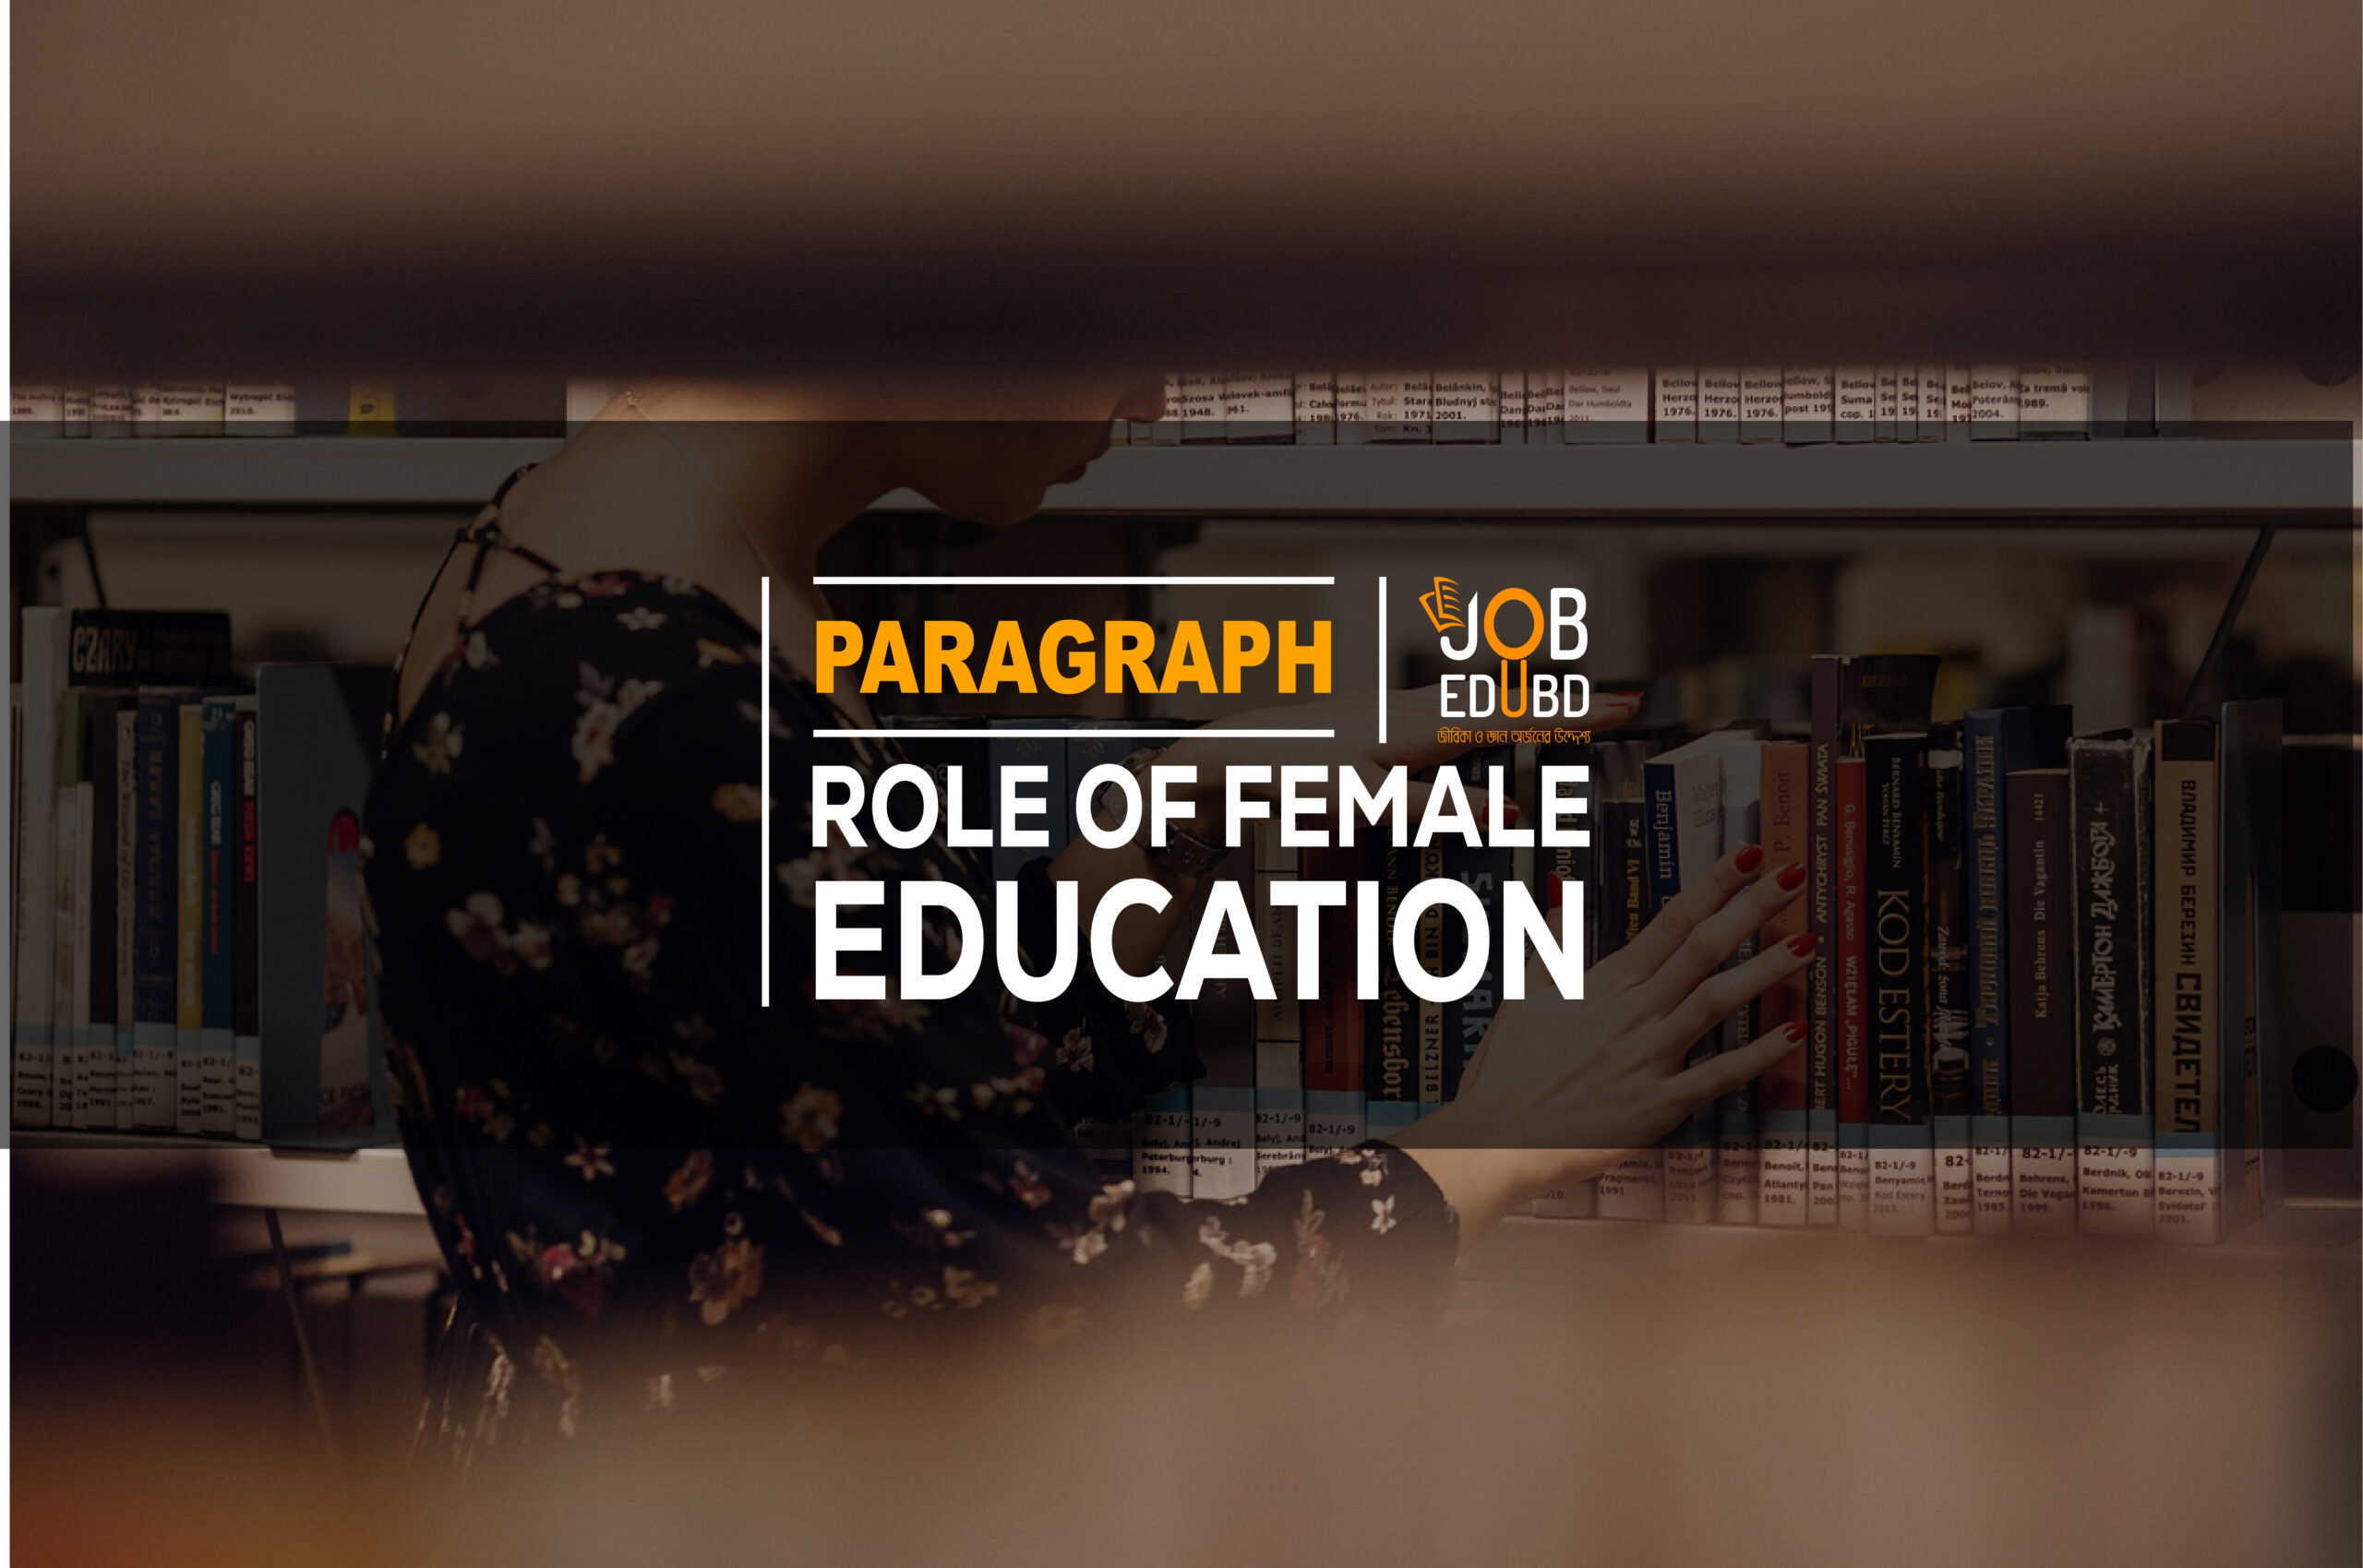 ROLE OF FEMALE EDUCATION Best Paragraph Writing